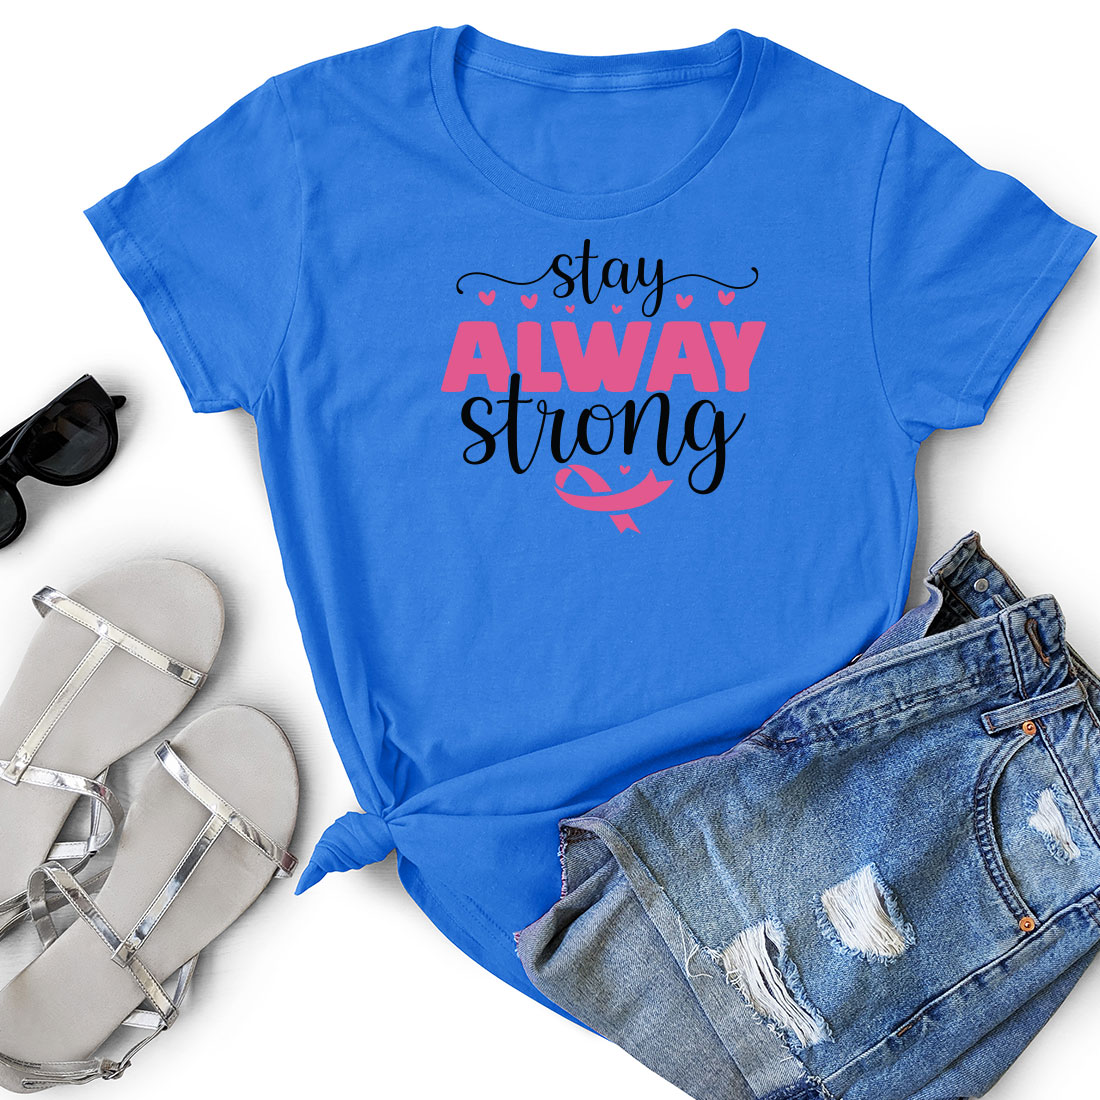 T - shirt that says stay away strong next to a pair of shorts.